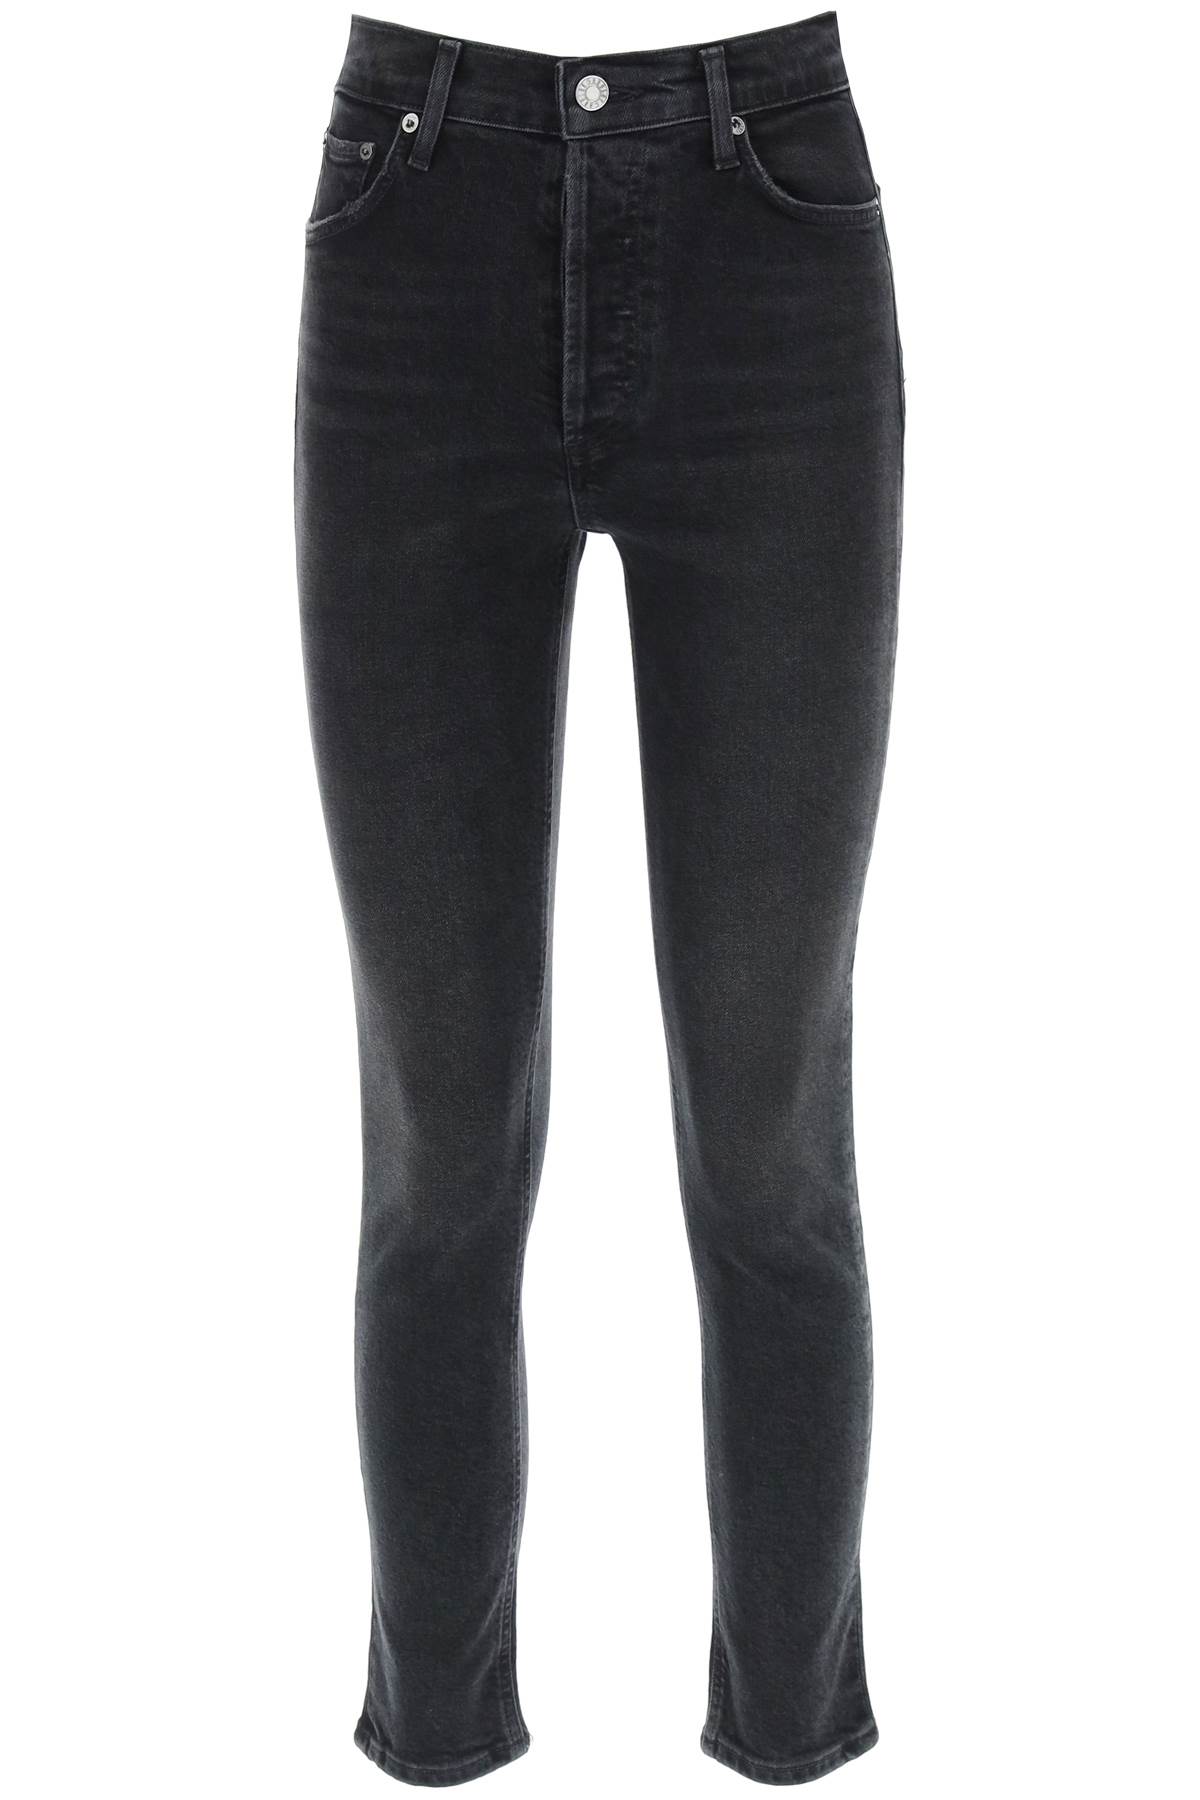 AGOLDE Nico High Rise Slim Fit Jeans